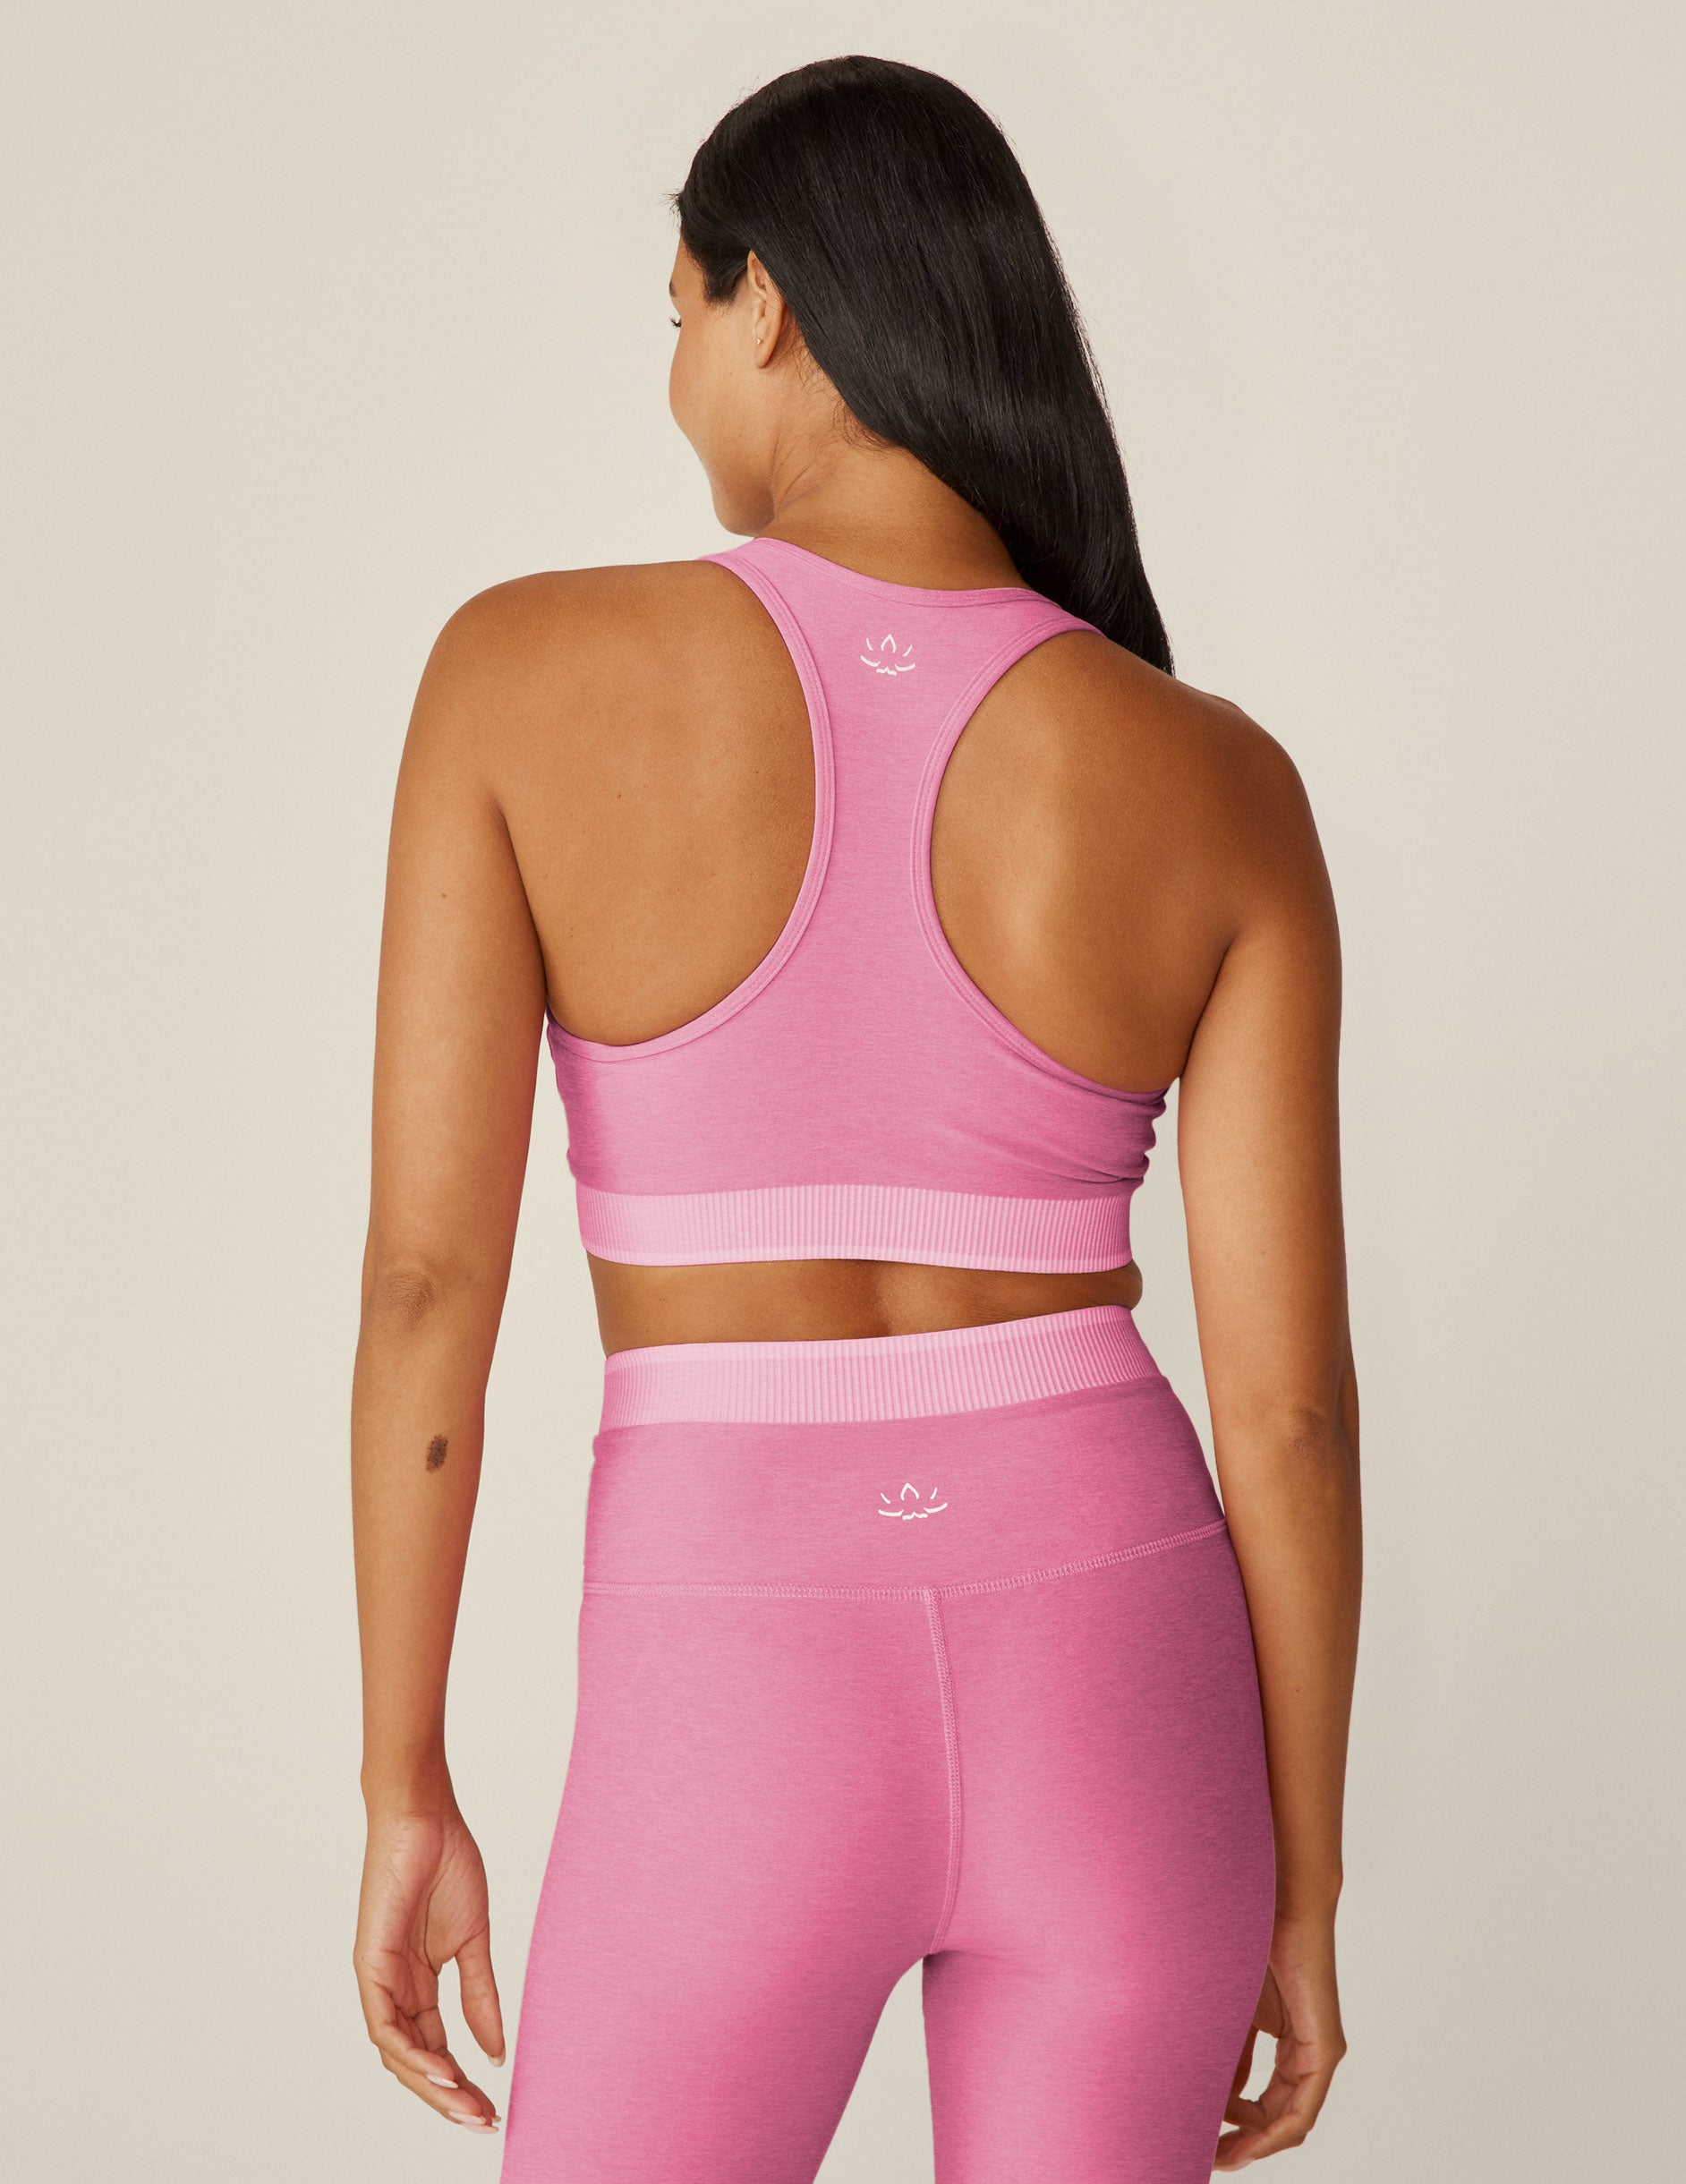  Beyond Yoga Olympus Compression One More Stripe Floral Bra,  Impressionist Floral Blush, X-Small : Clothing, Shoes & Jewelry